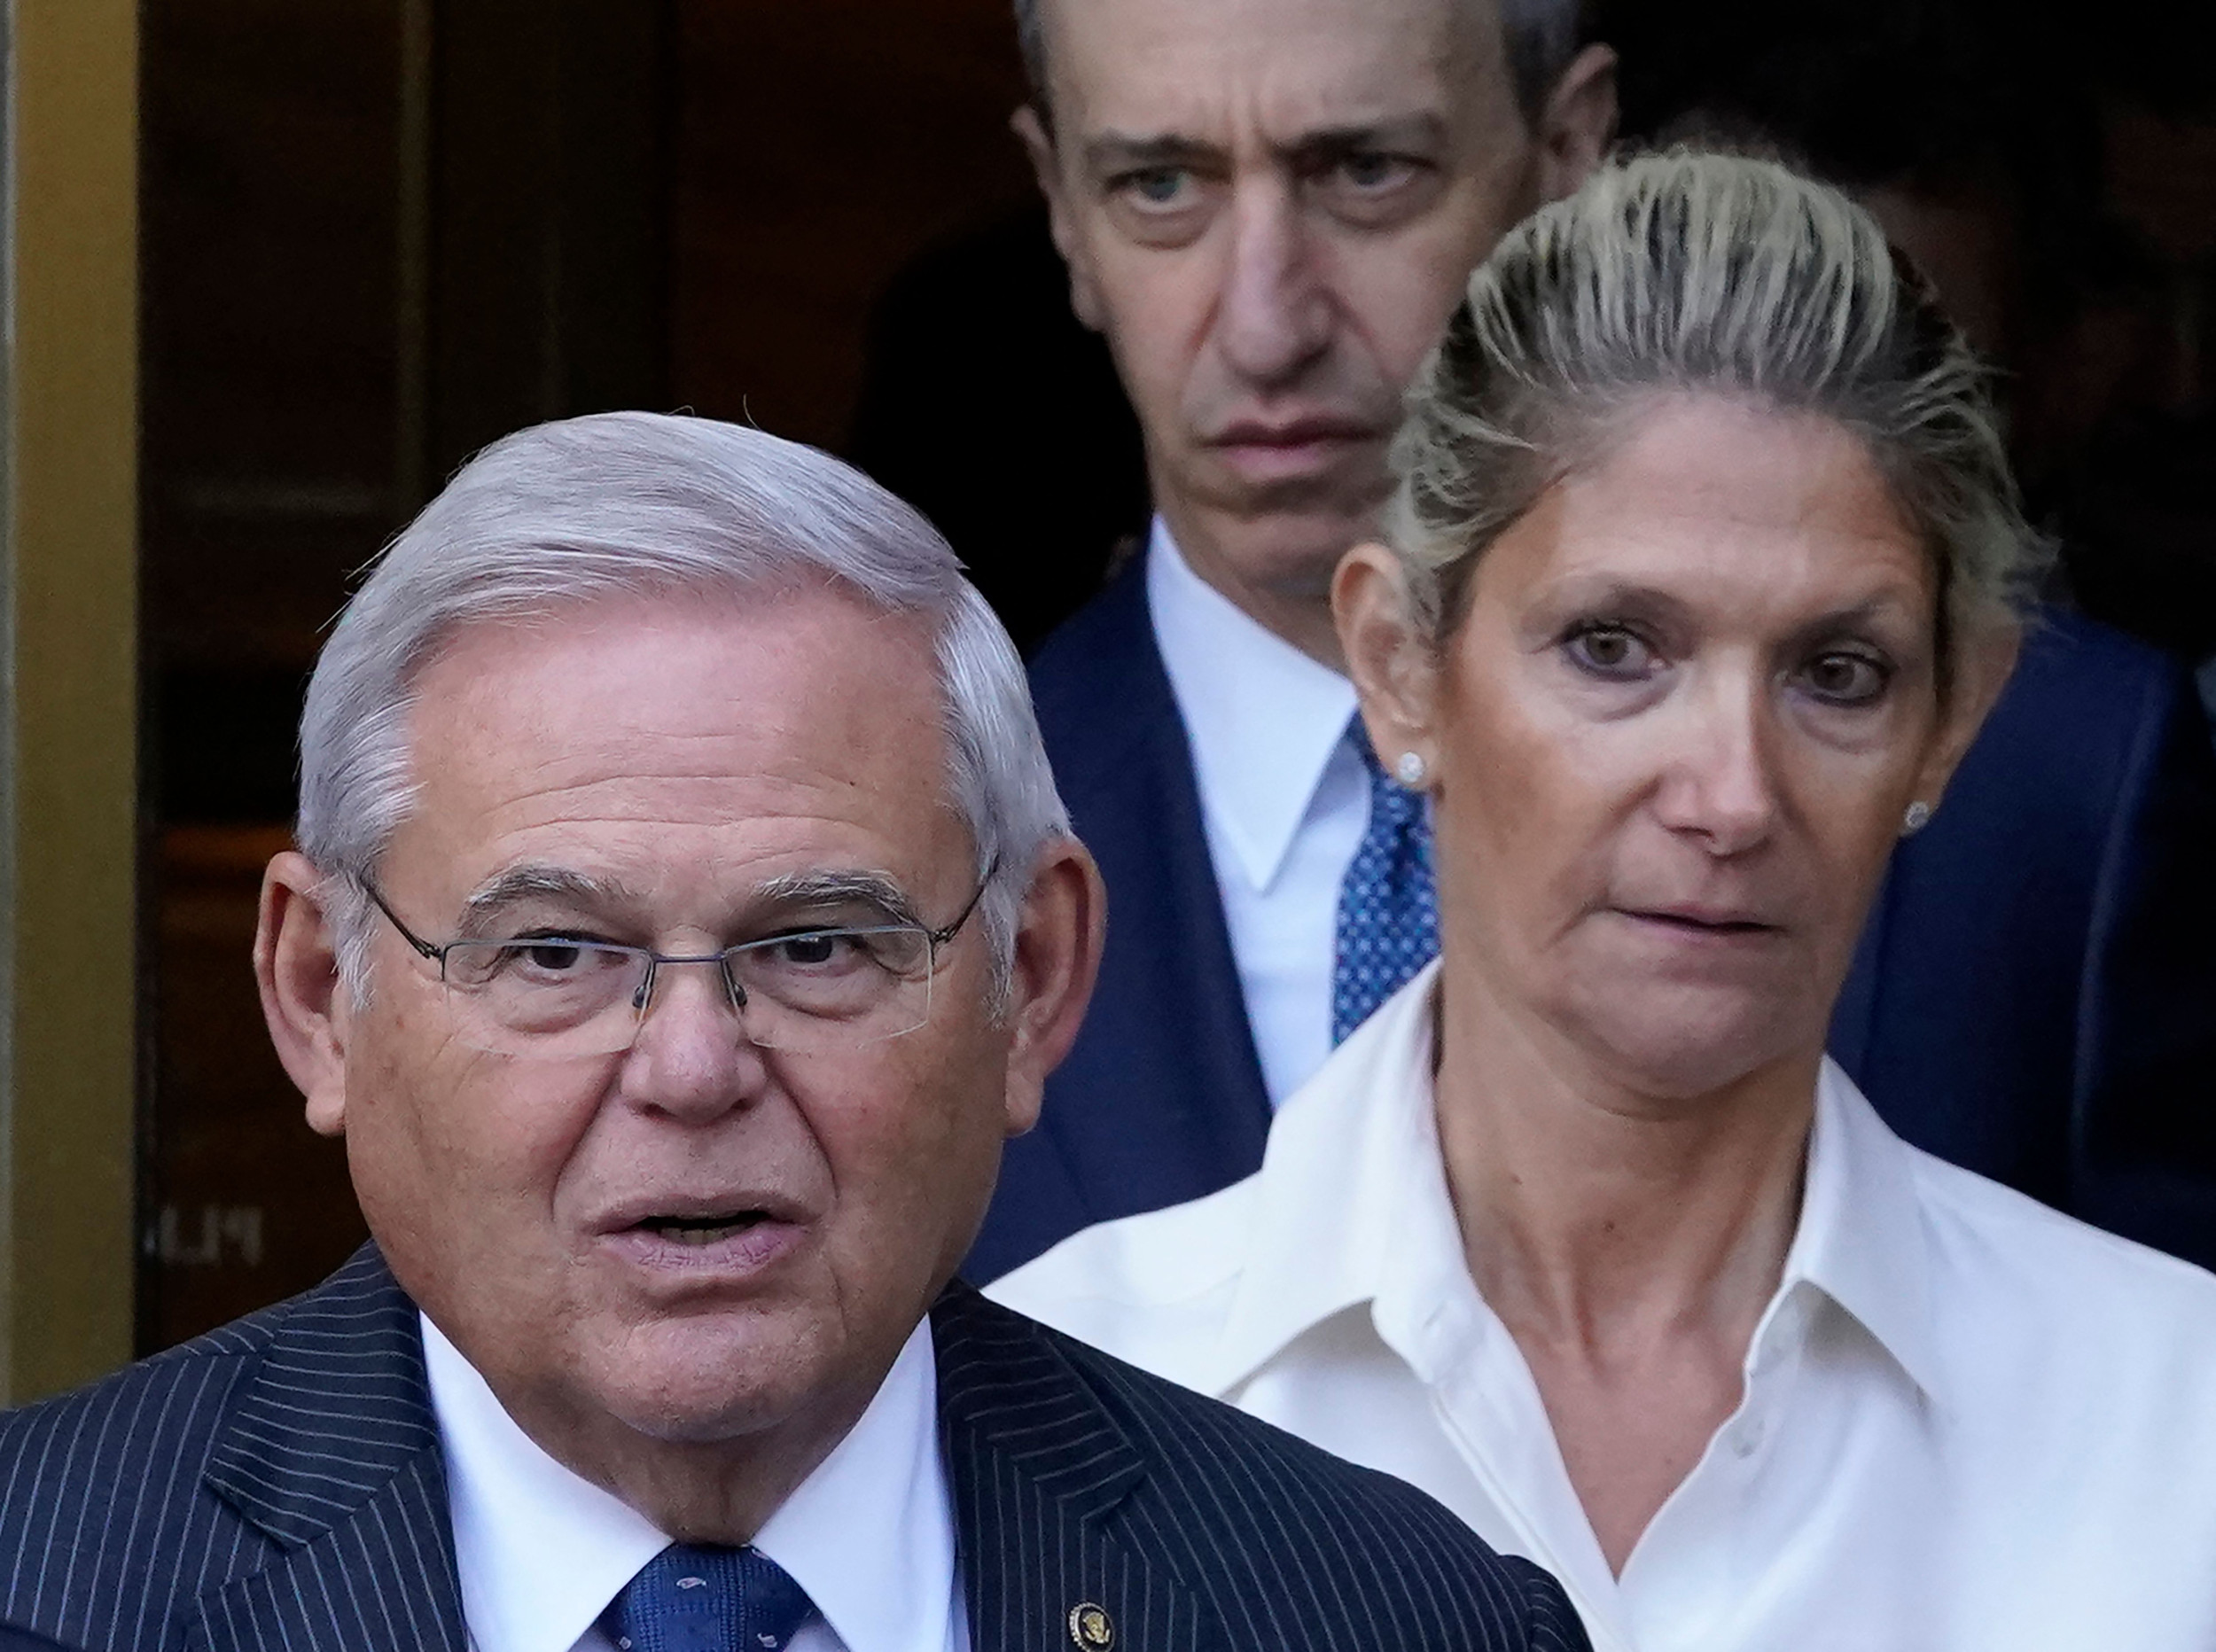 Bob Menendez Announces Wife Has Cancer Amid Trial: Everything We Know [Video]